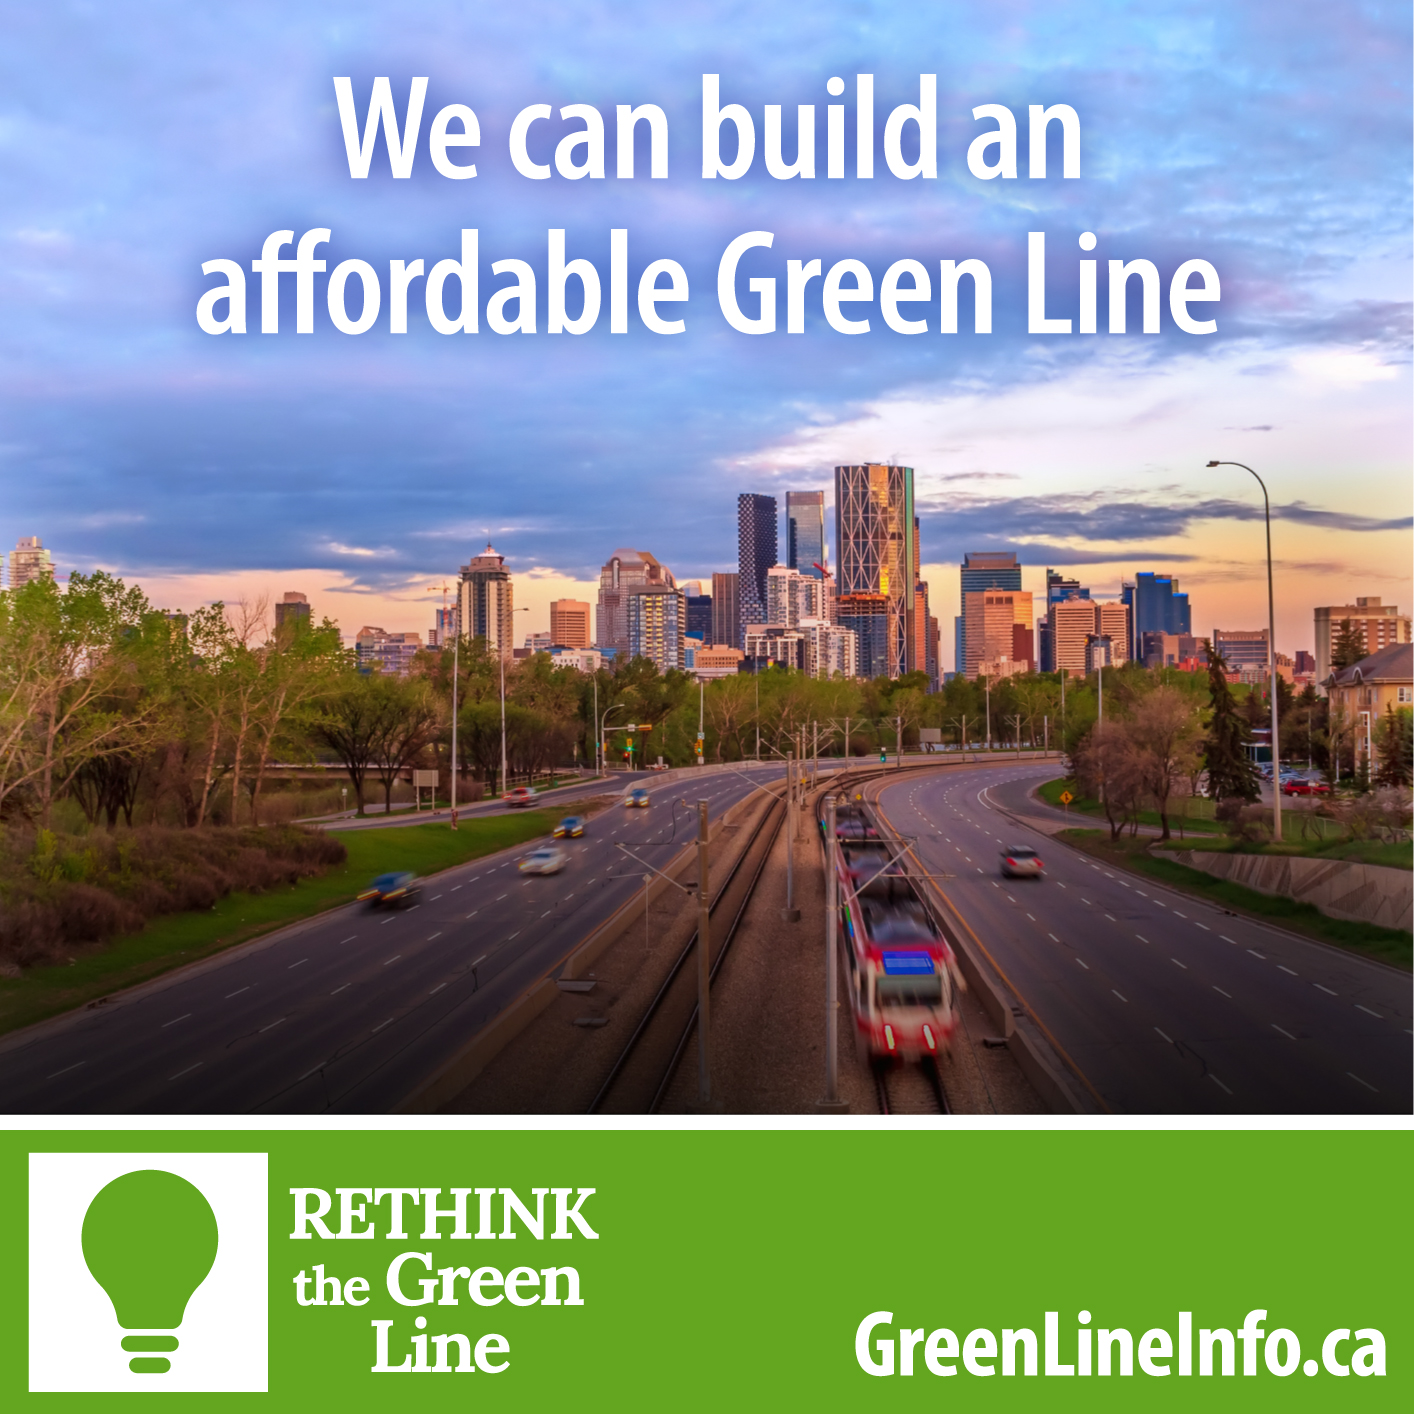 We can build an affordable Green Line